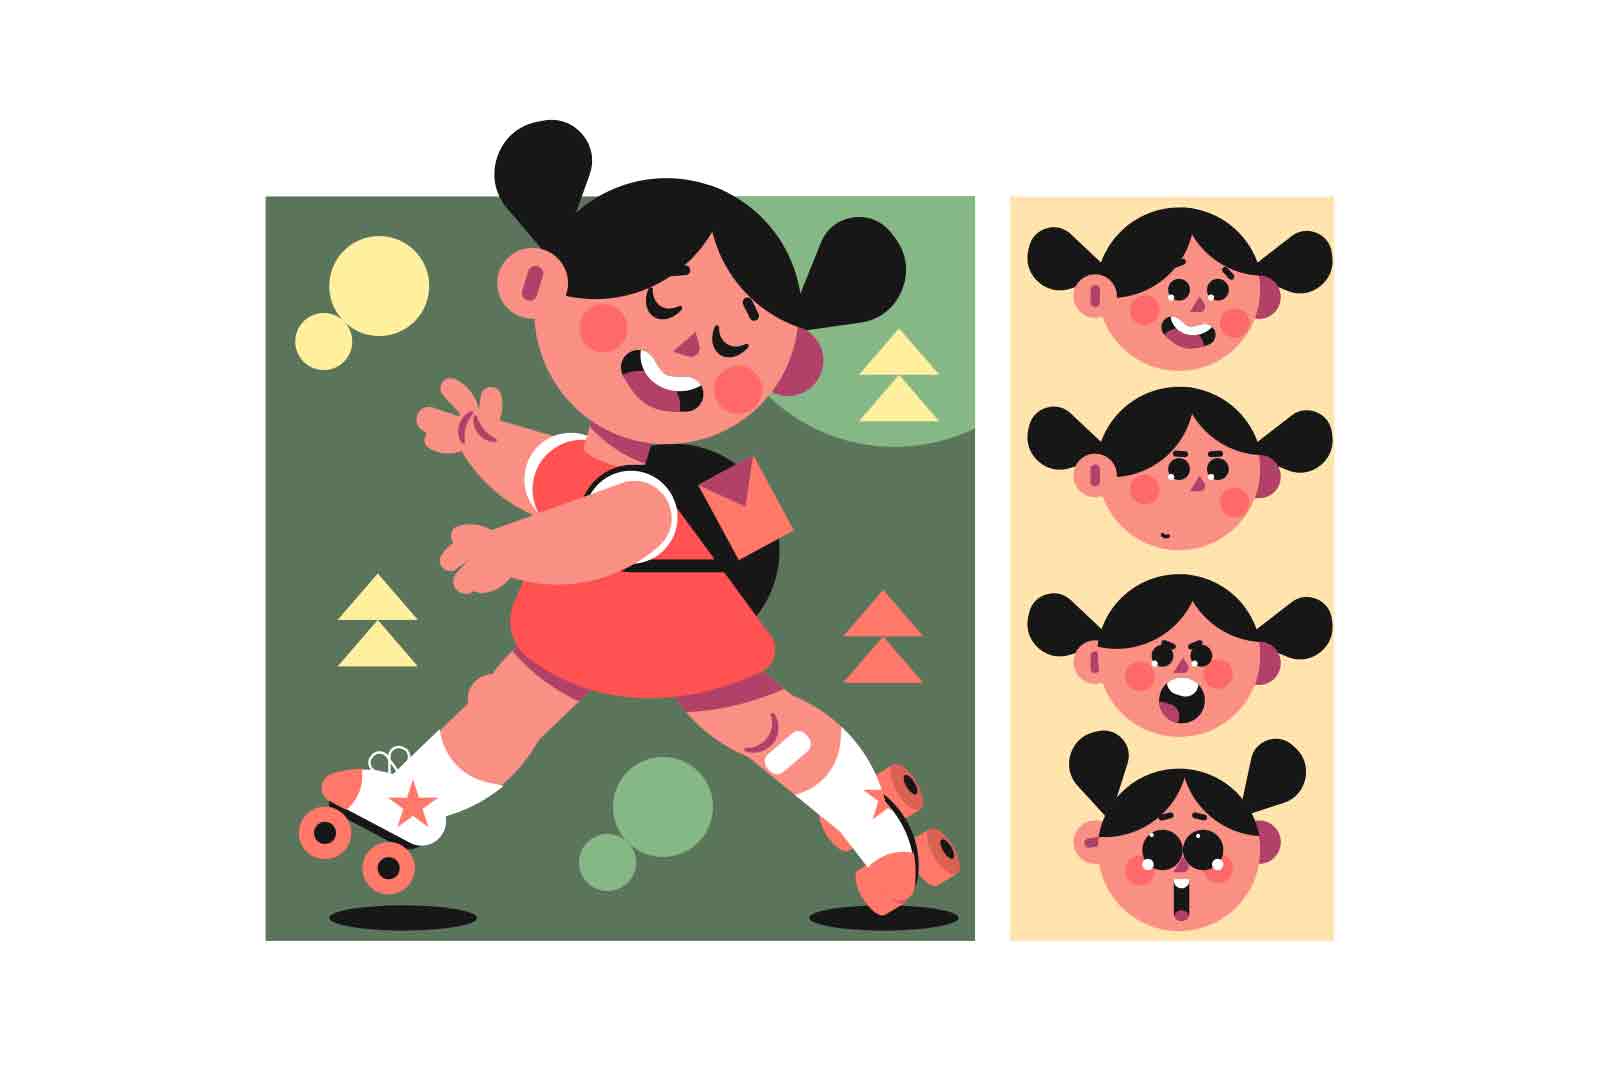 Vector illustration of girl roller skating on green background with yellow and pink triangles. Four different facial expressions.